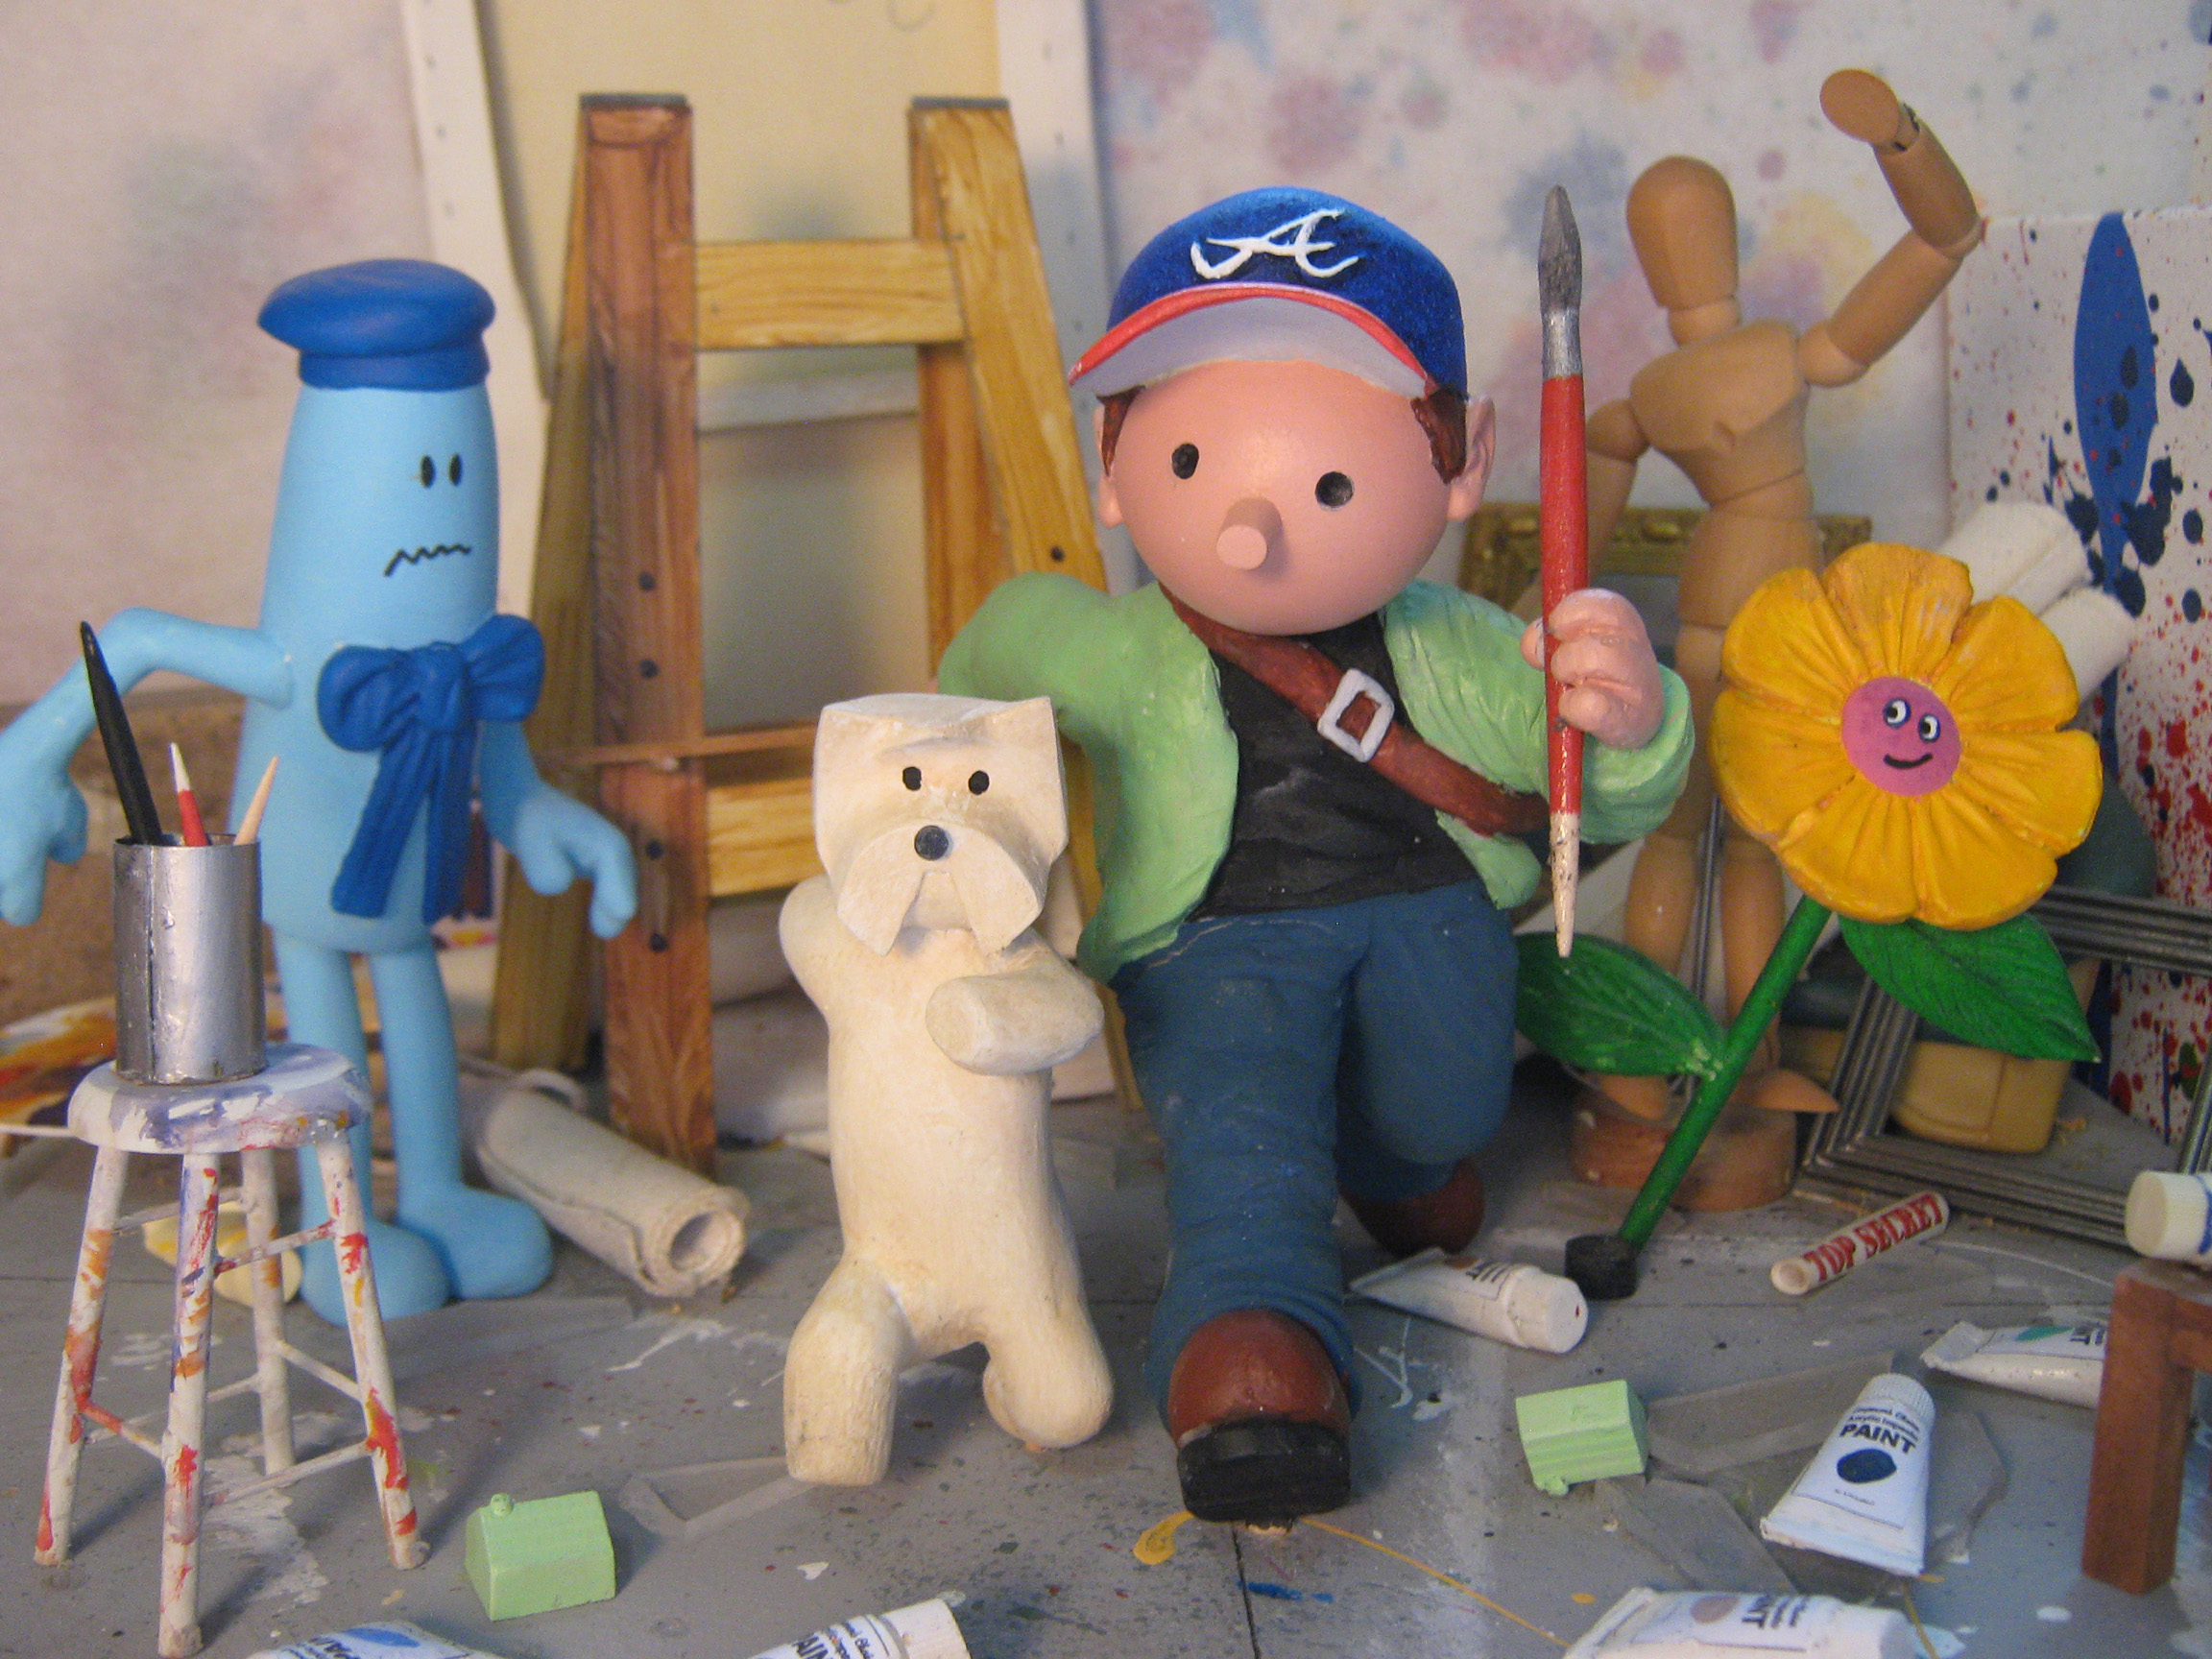 A small, sculpted scene of a character and his dog running through an art studio by artist Alisdair Macintyre.